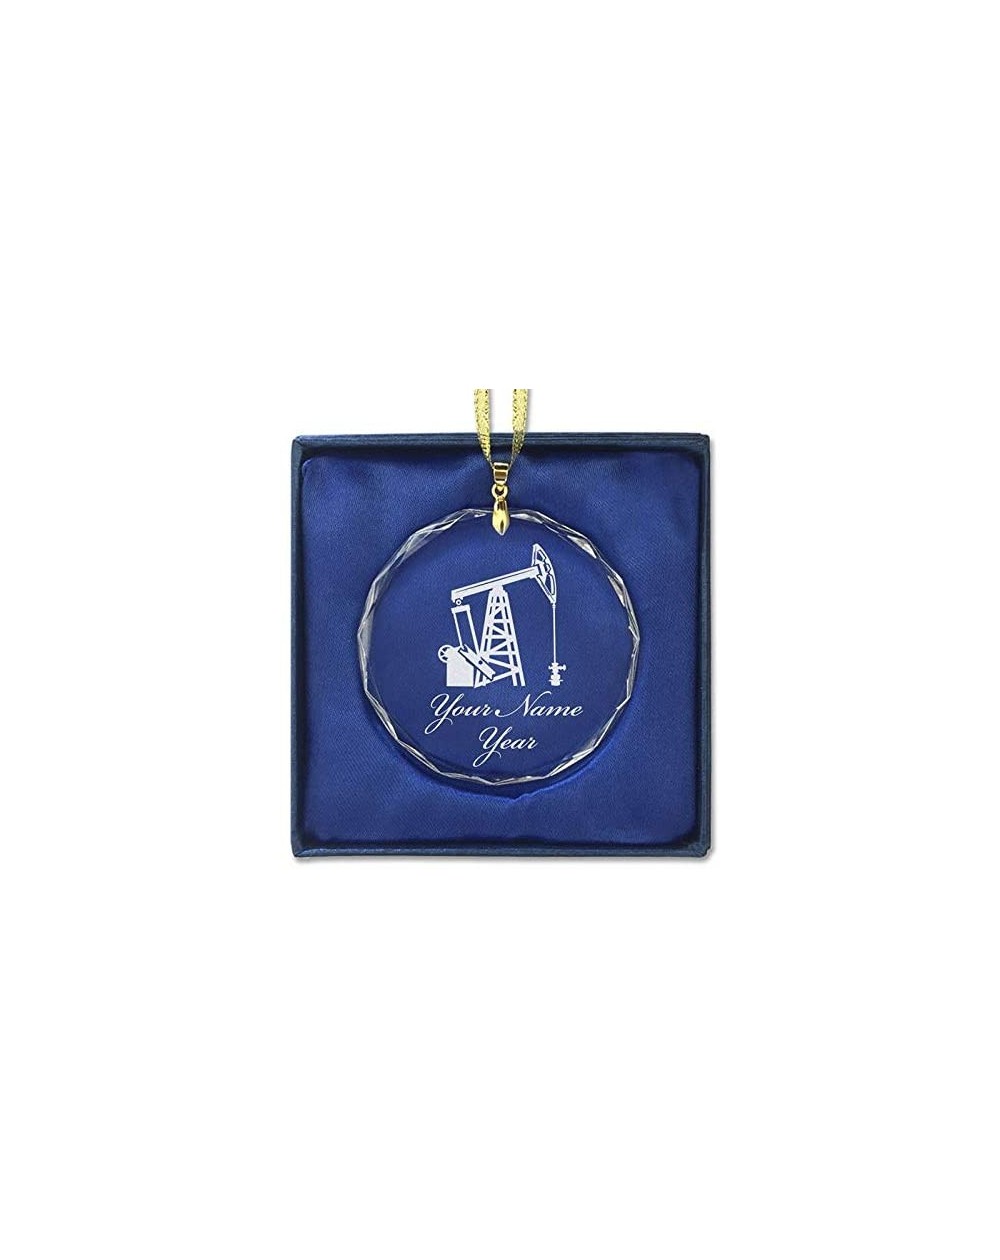 Ornaments Christmas Ornament- Pumpjack- Personalized Engraving Included (Round Shape) - C418Q0E3D8W $24.69